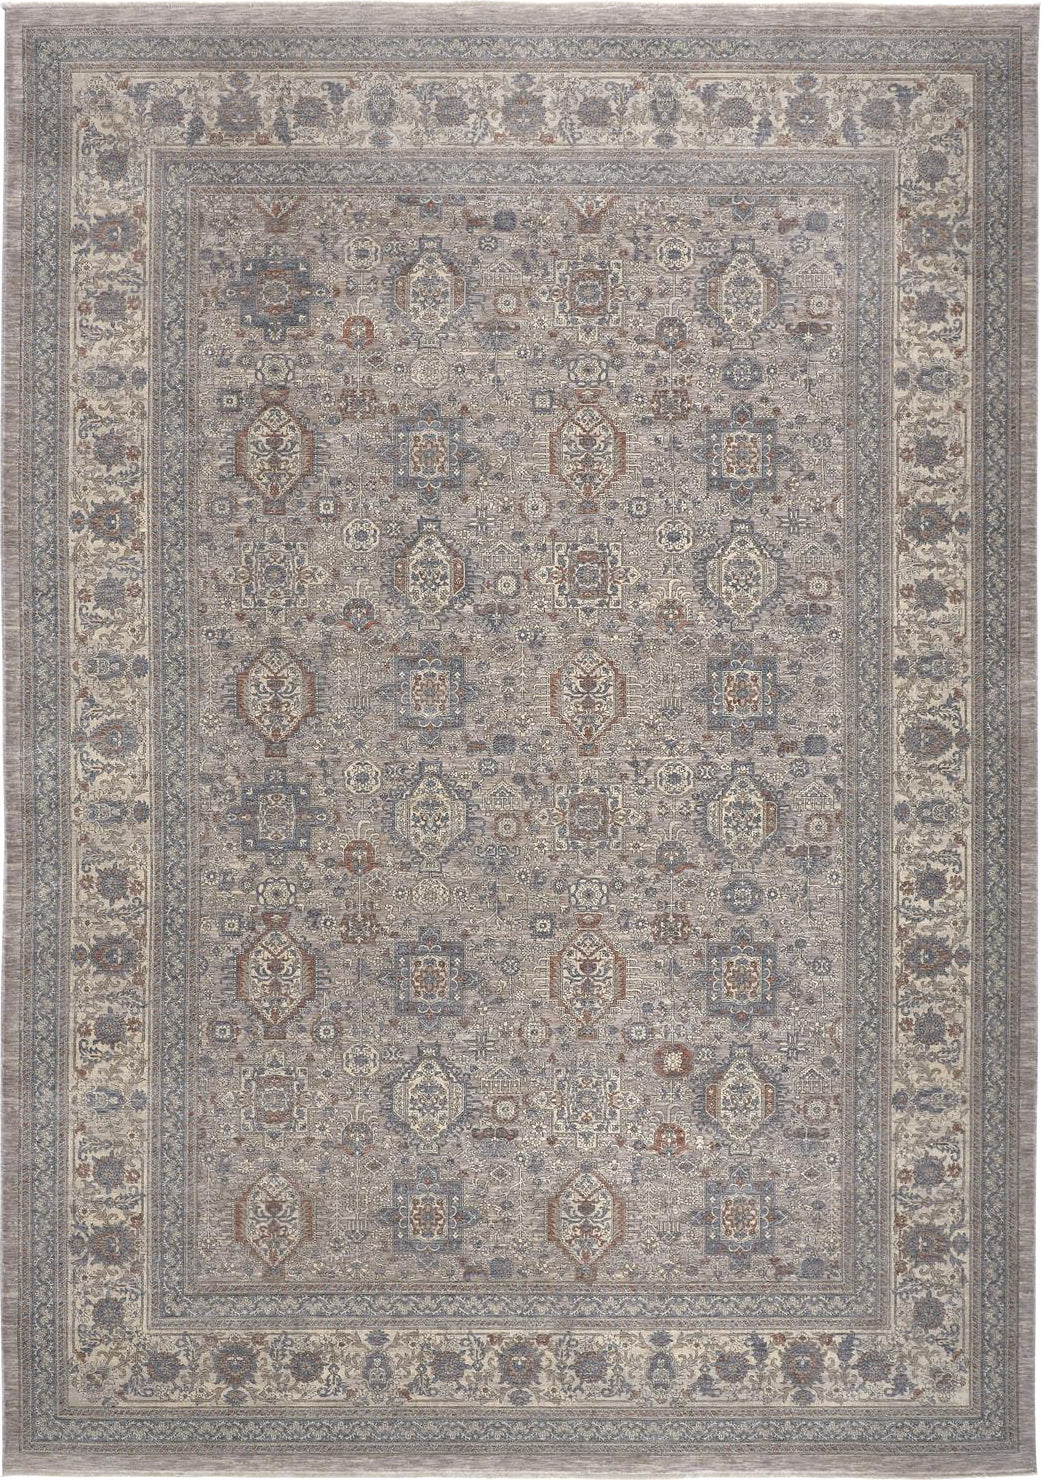 Feizy Marquette 3761F Gray/Blue Area Rug main image